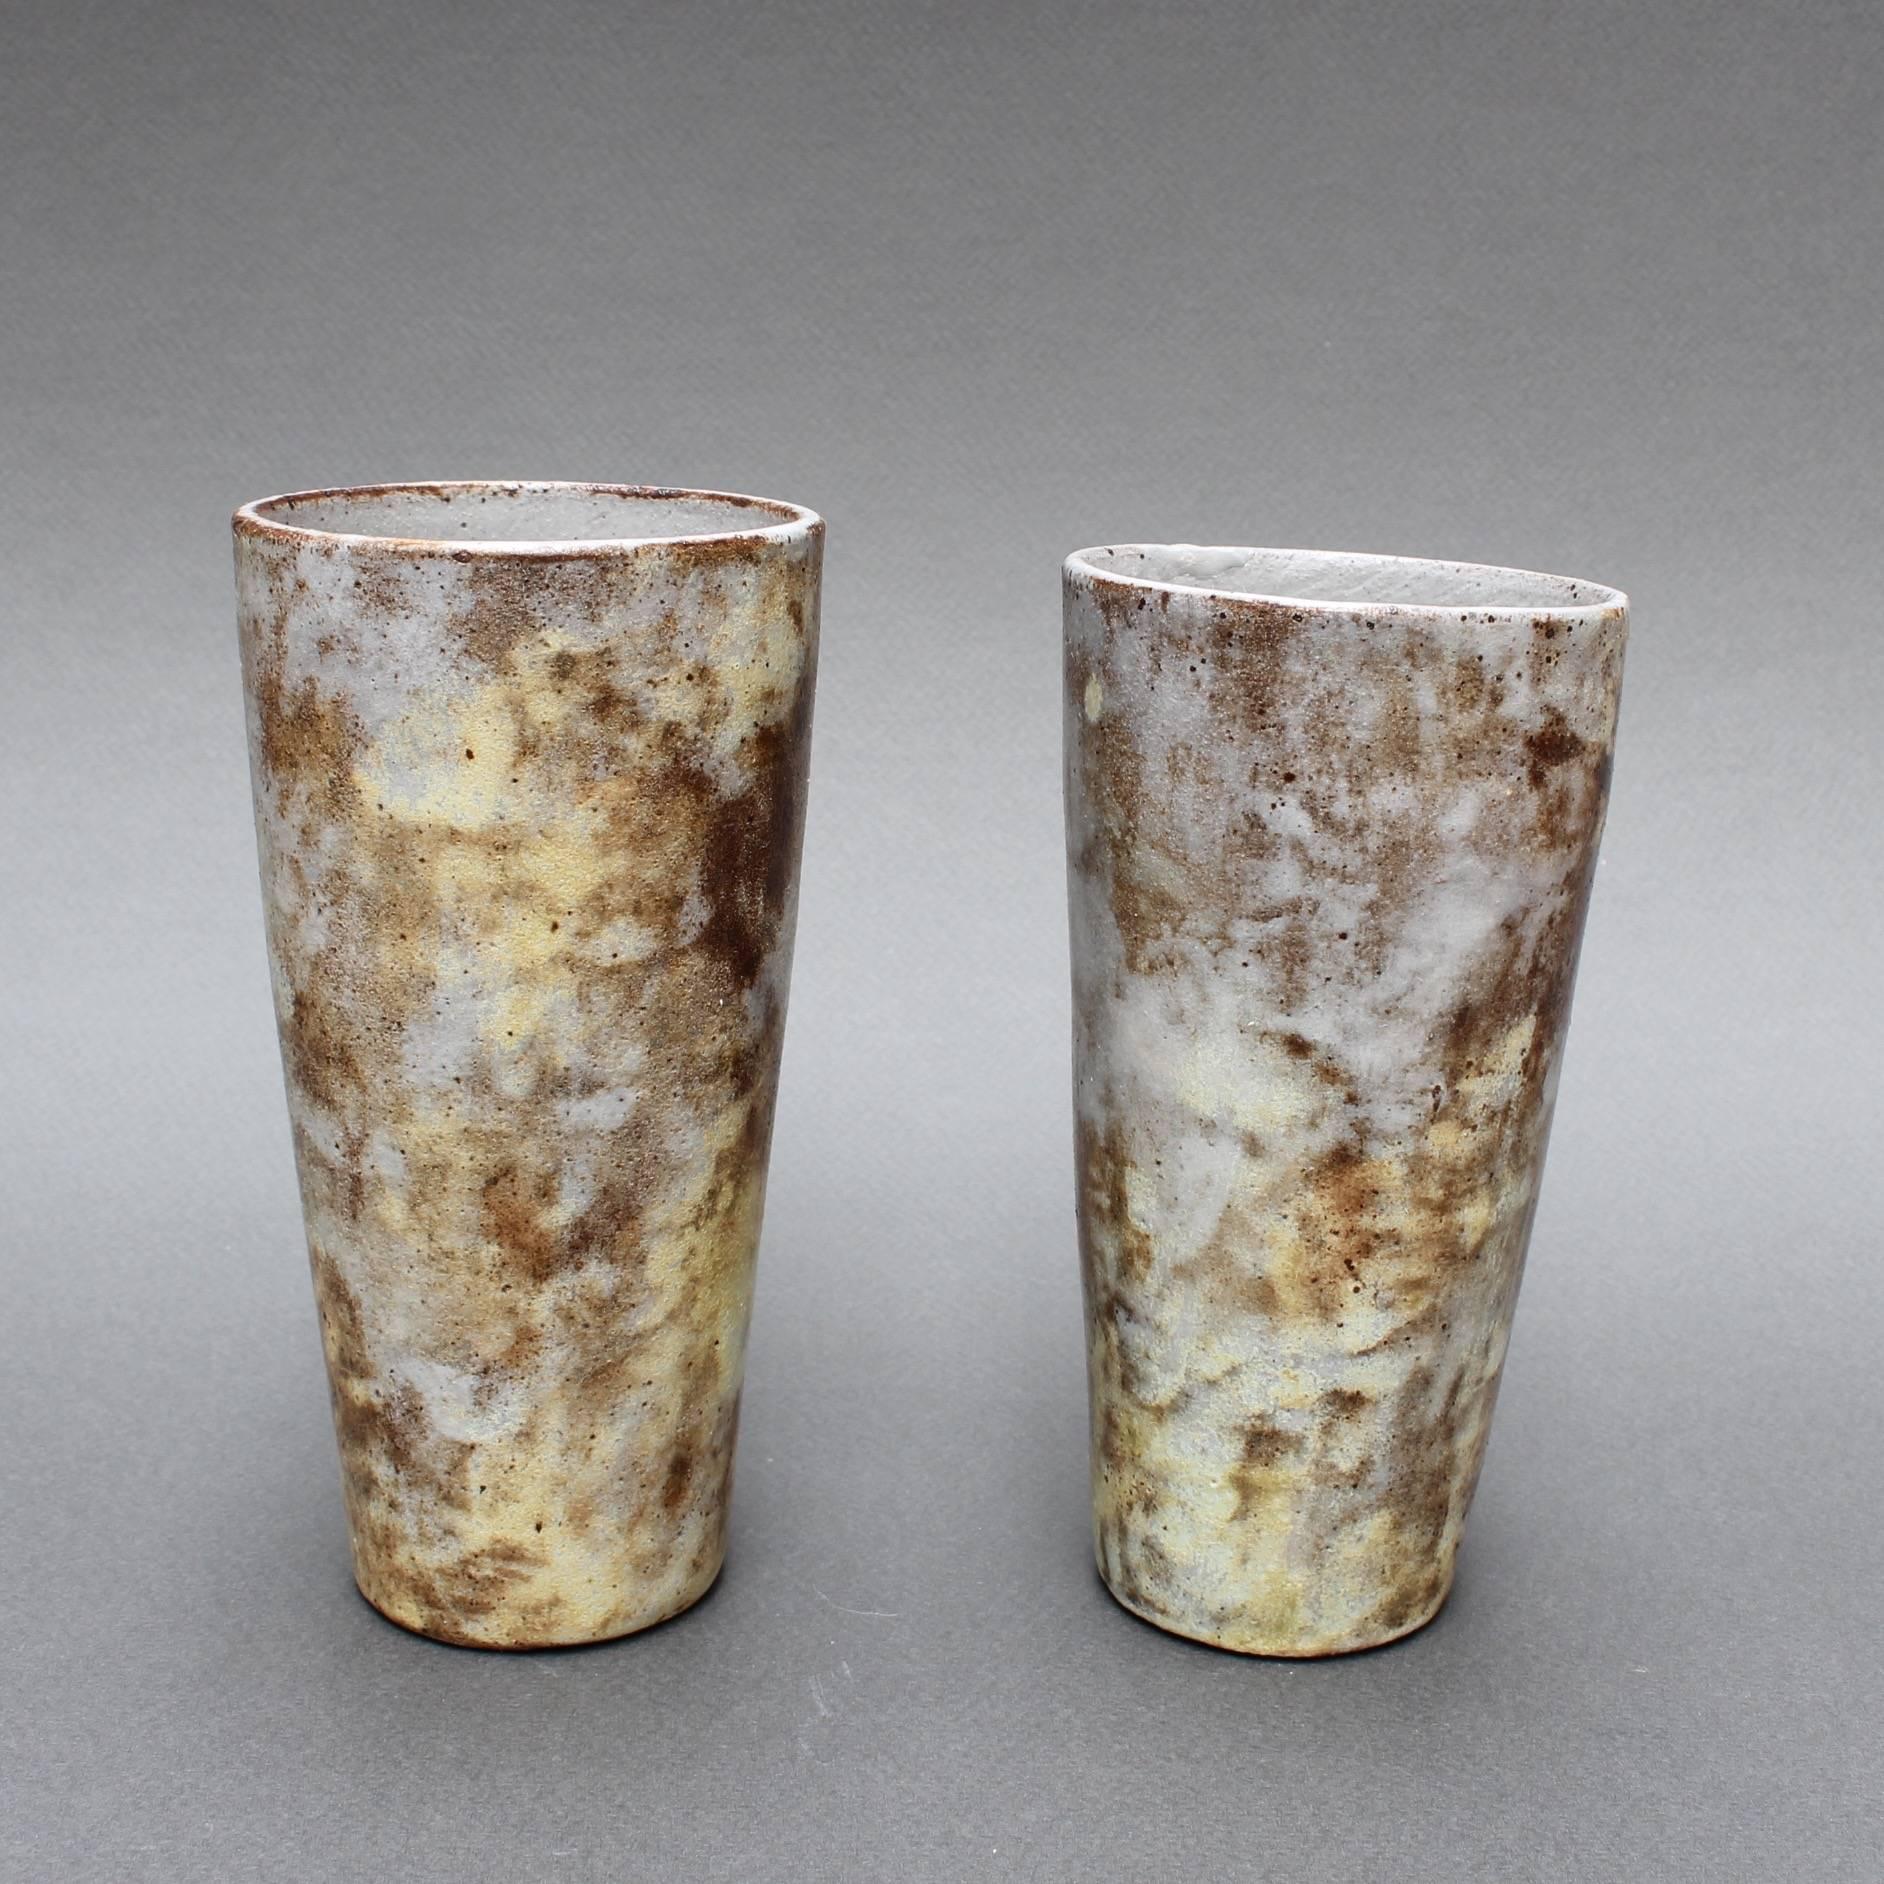 Set of two ceramic vases/cups by Alexandre Kostanda (circa 1960s). This pair of beautiful vessels - one slightly shorter than the other - present a misty appearance with earth tones in brown, beige and delicate yellows. They may be displayed